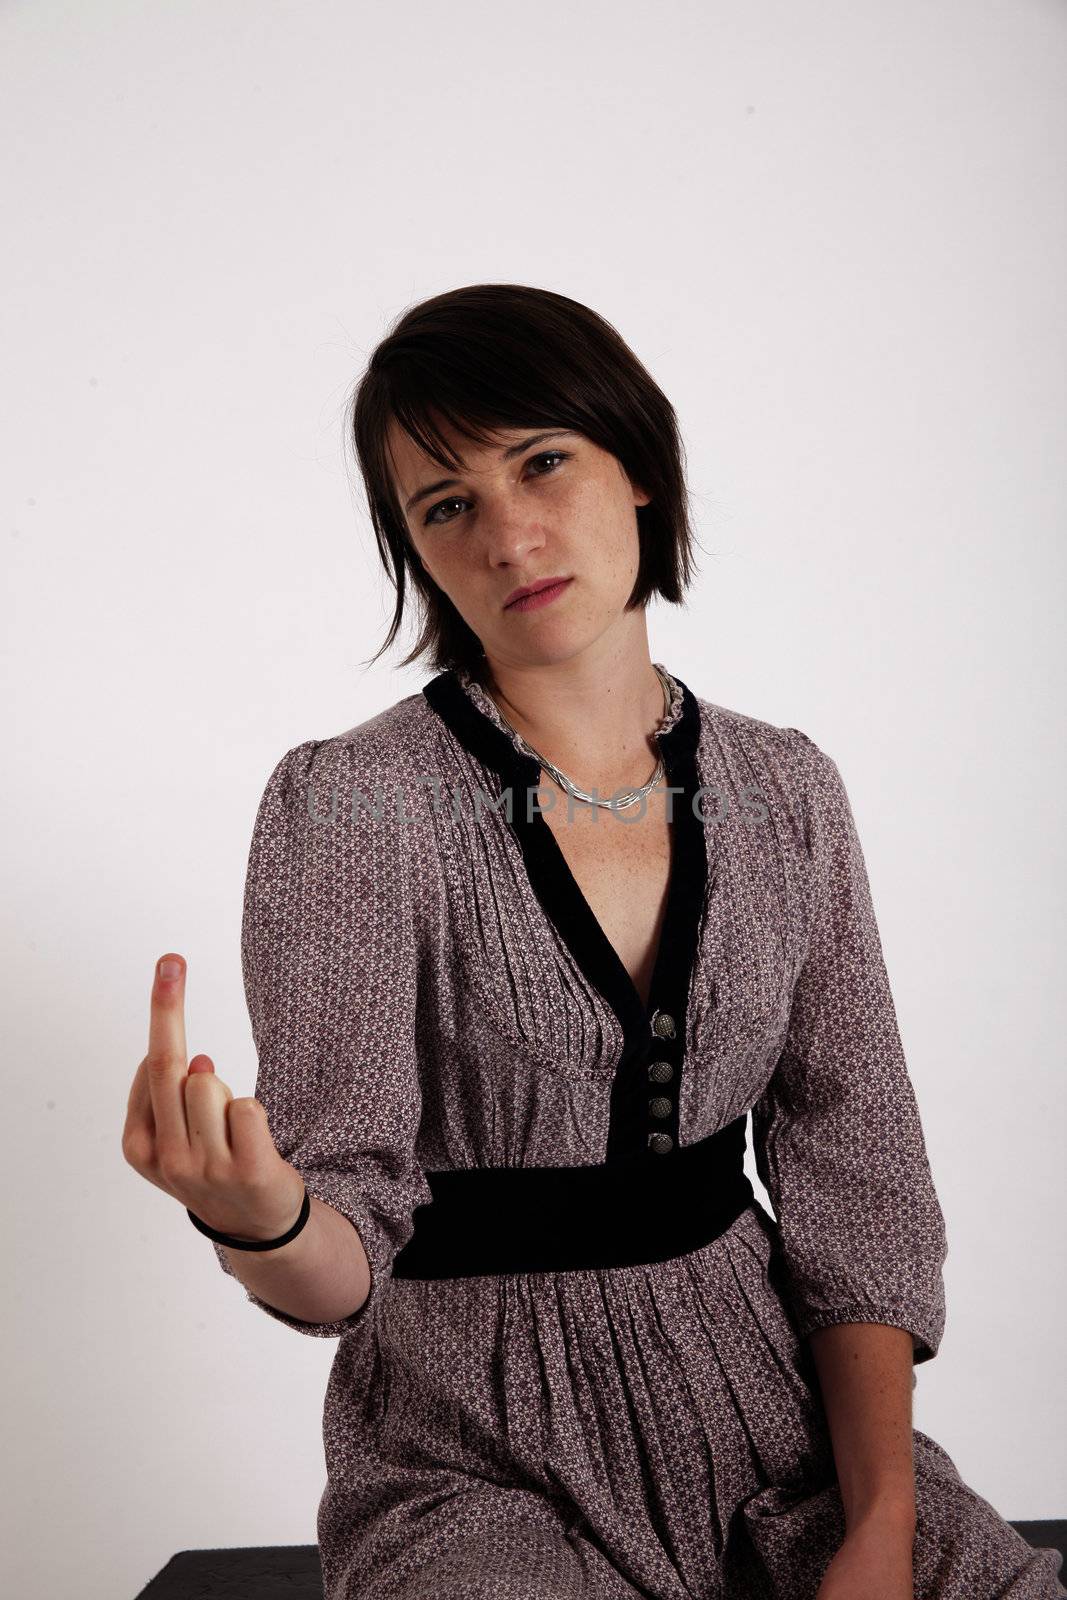 scornful young brunette woman on studio with her finger up